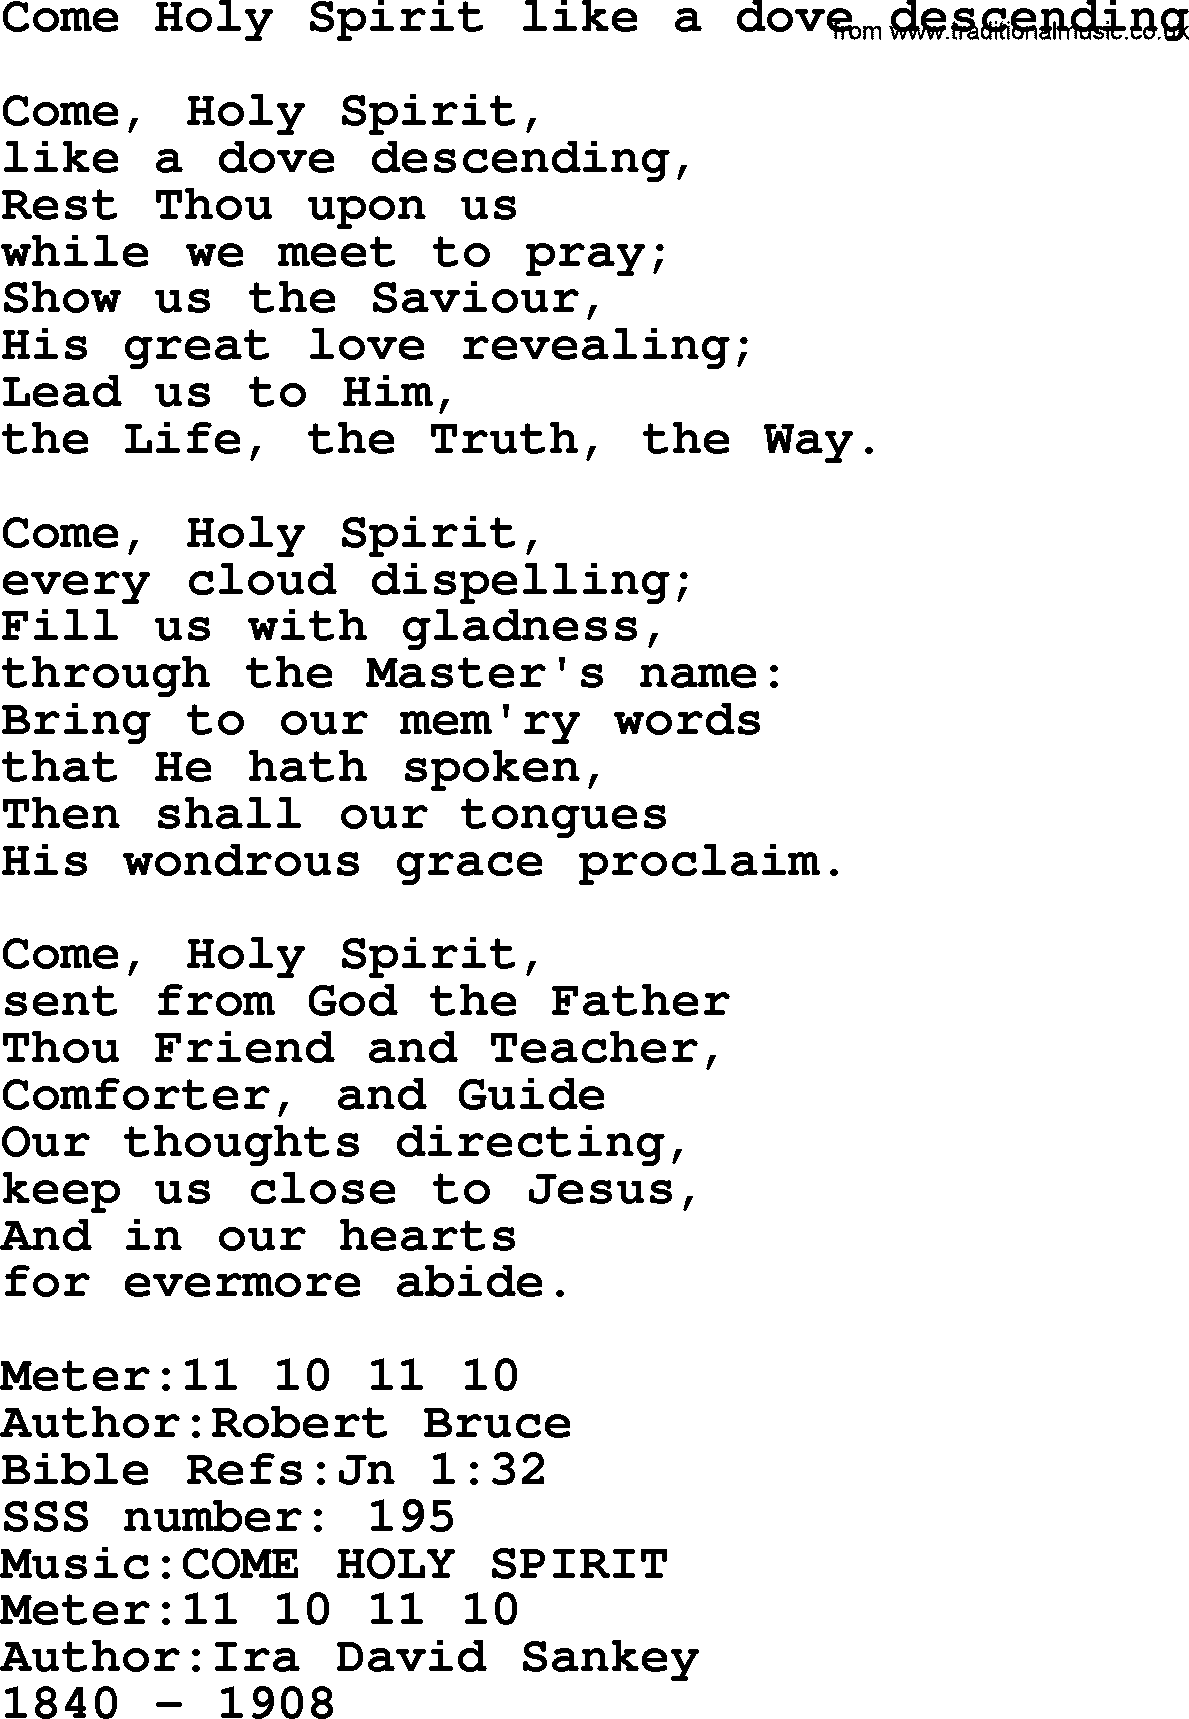 Sacred Songs and Solos complete, 1200 Hymns, title: Come Holy Spirit Like A Dove Descending, lyrics and PDF